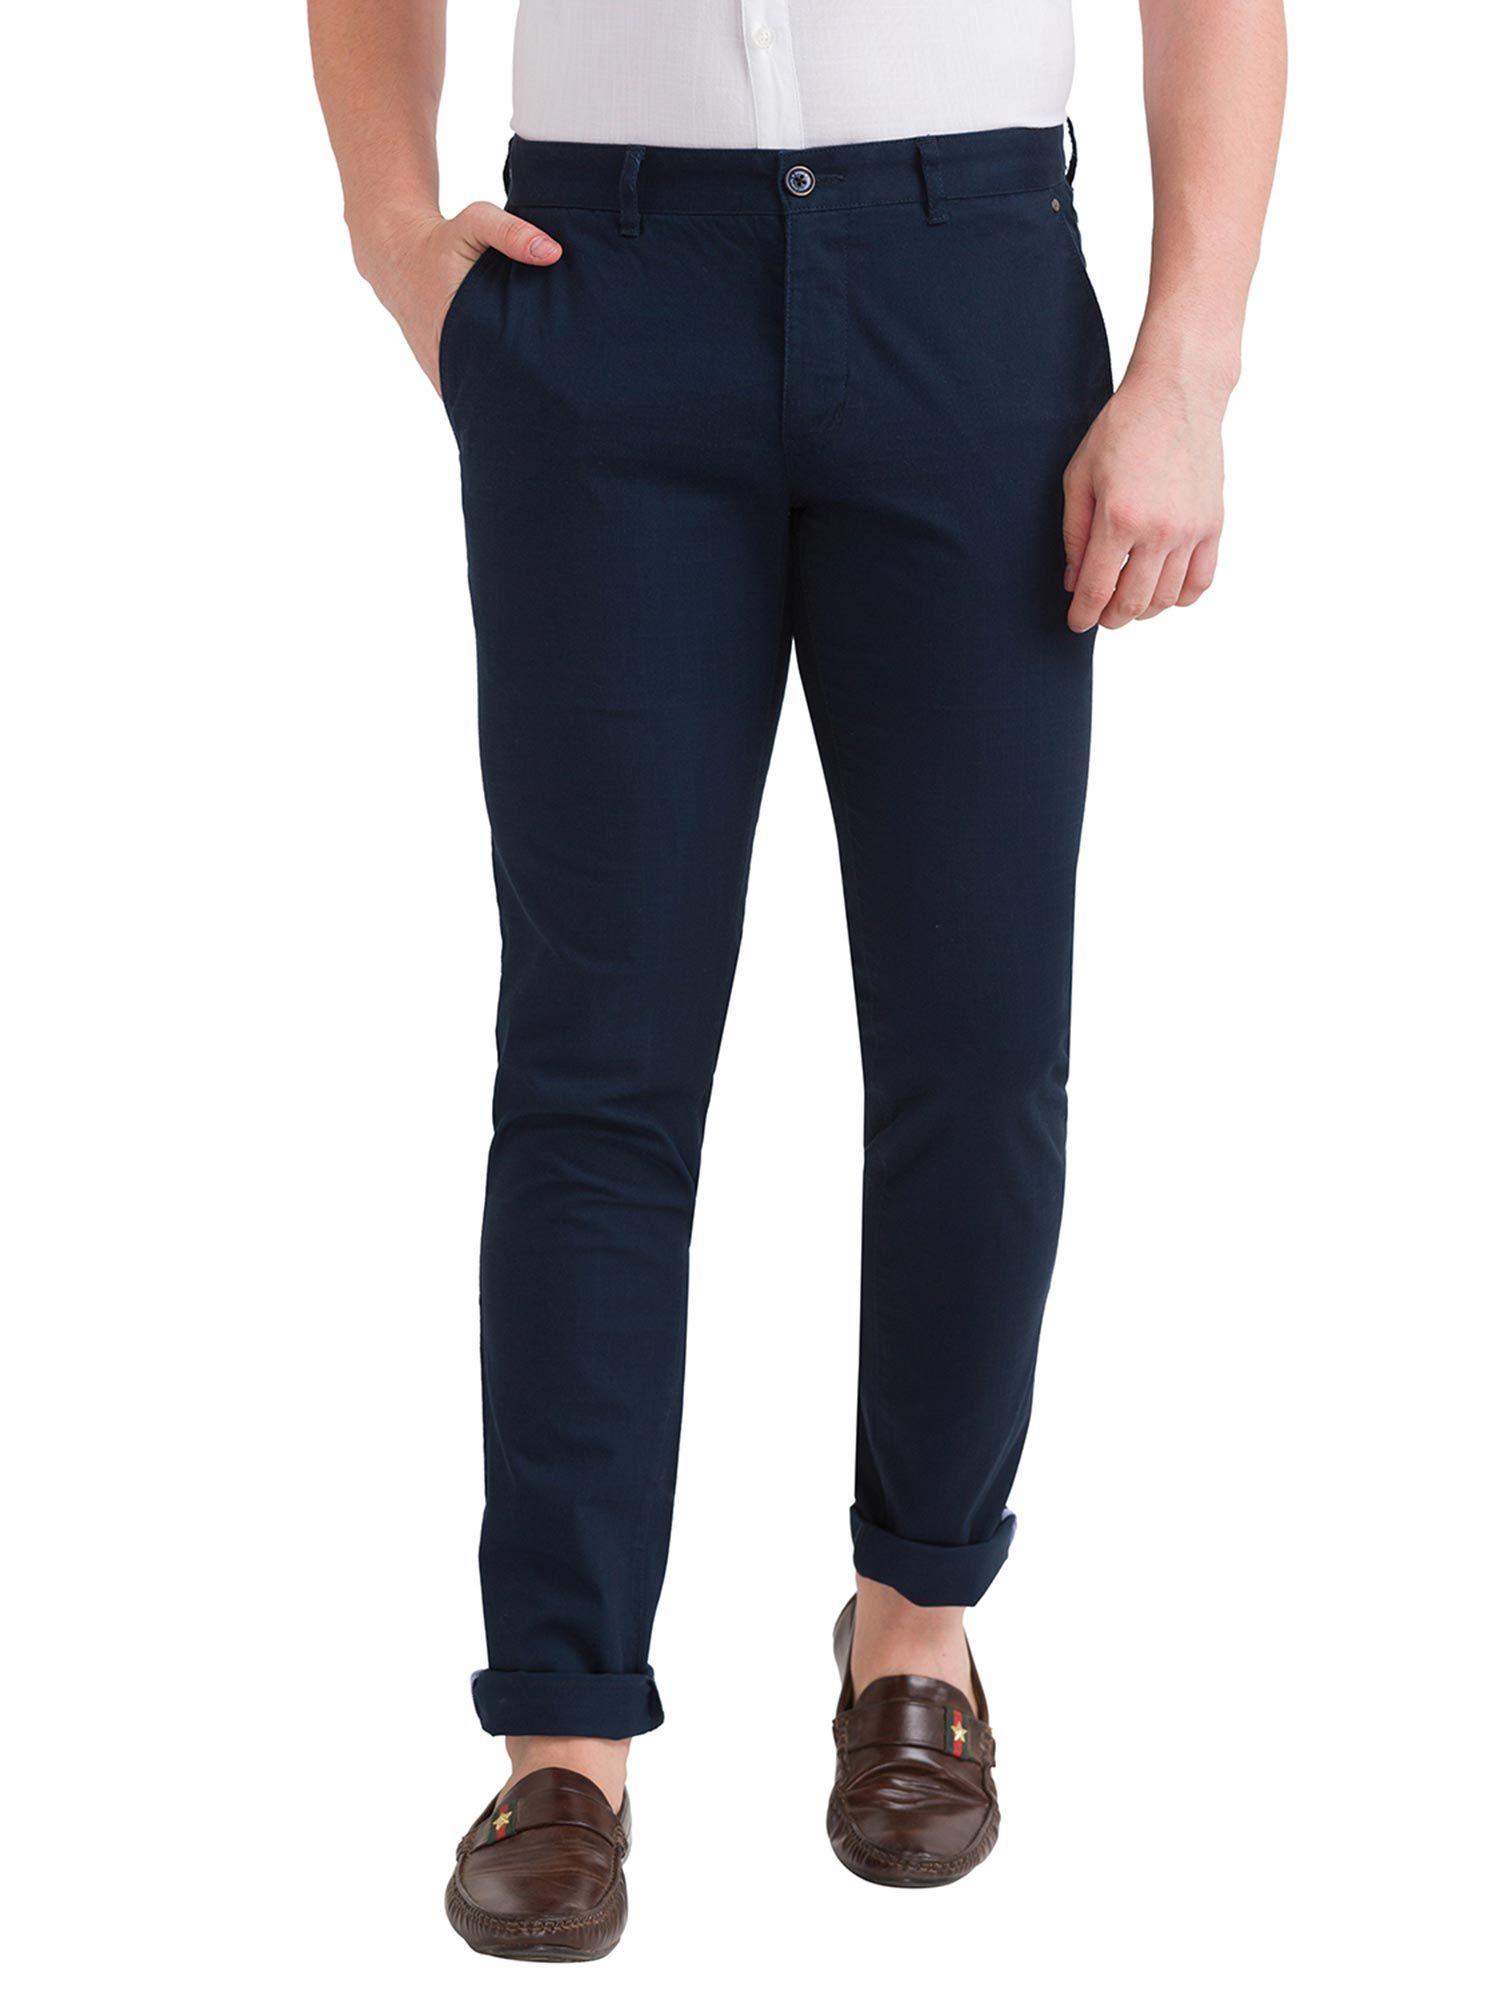 navy-blue-trousers